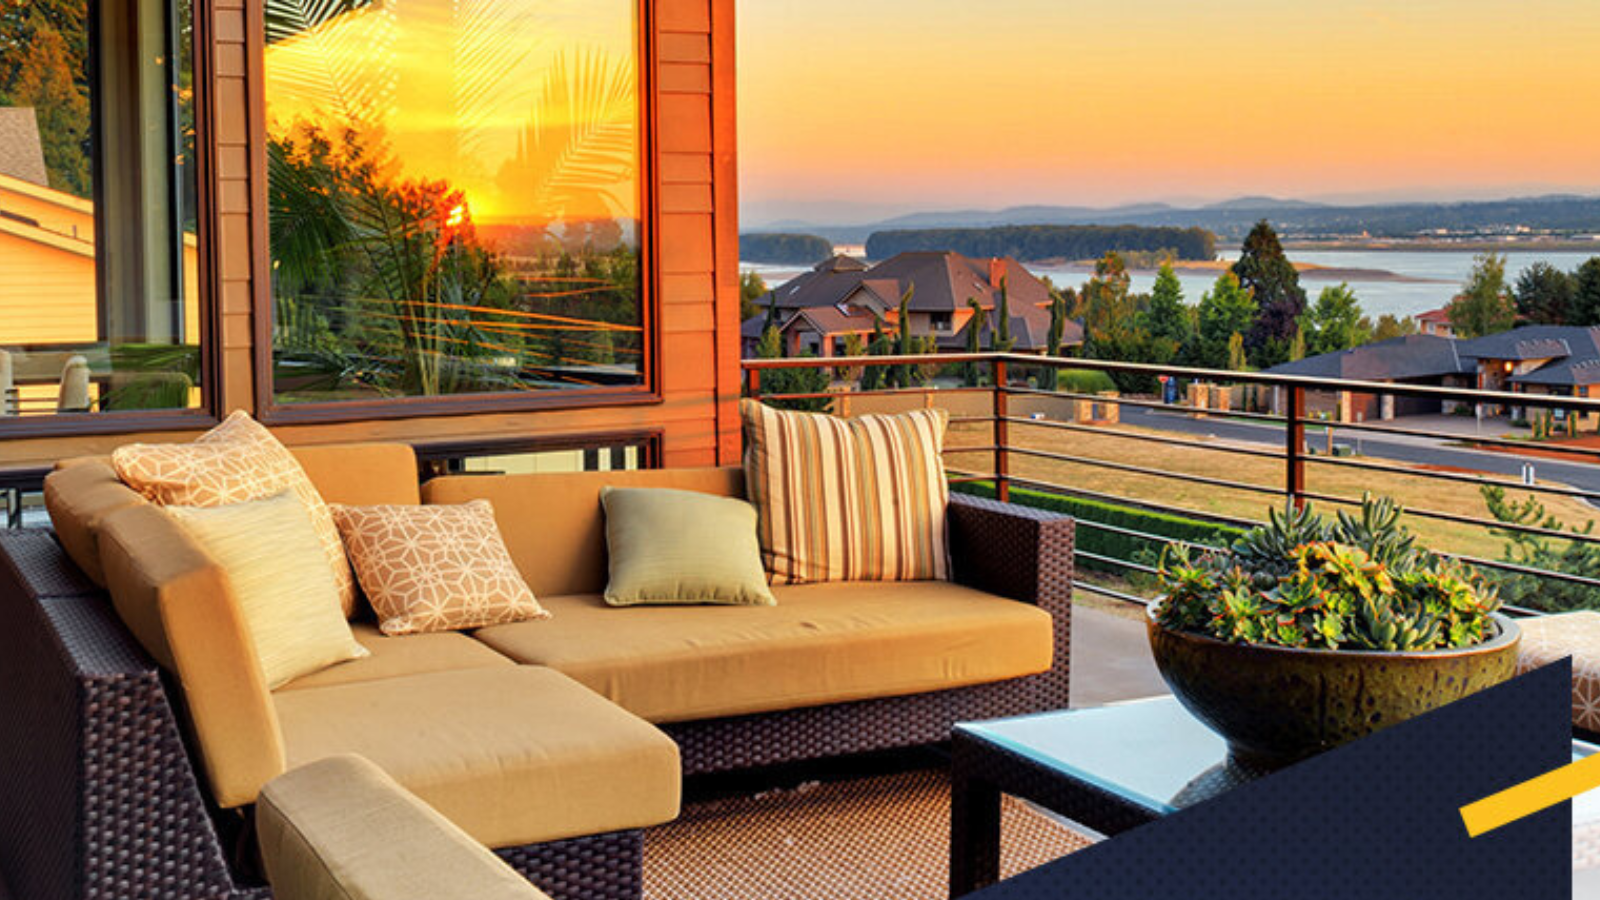 5 Amazing Ideas to Transform Your Outdoor Living Space in the Bay Area